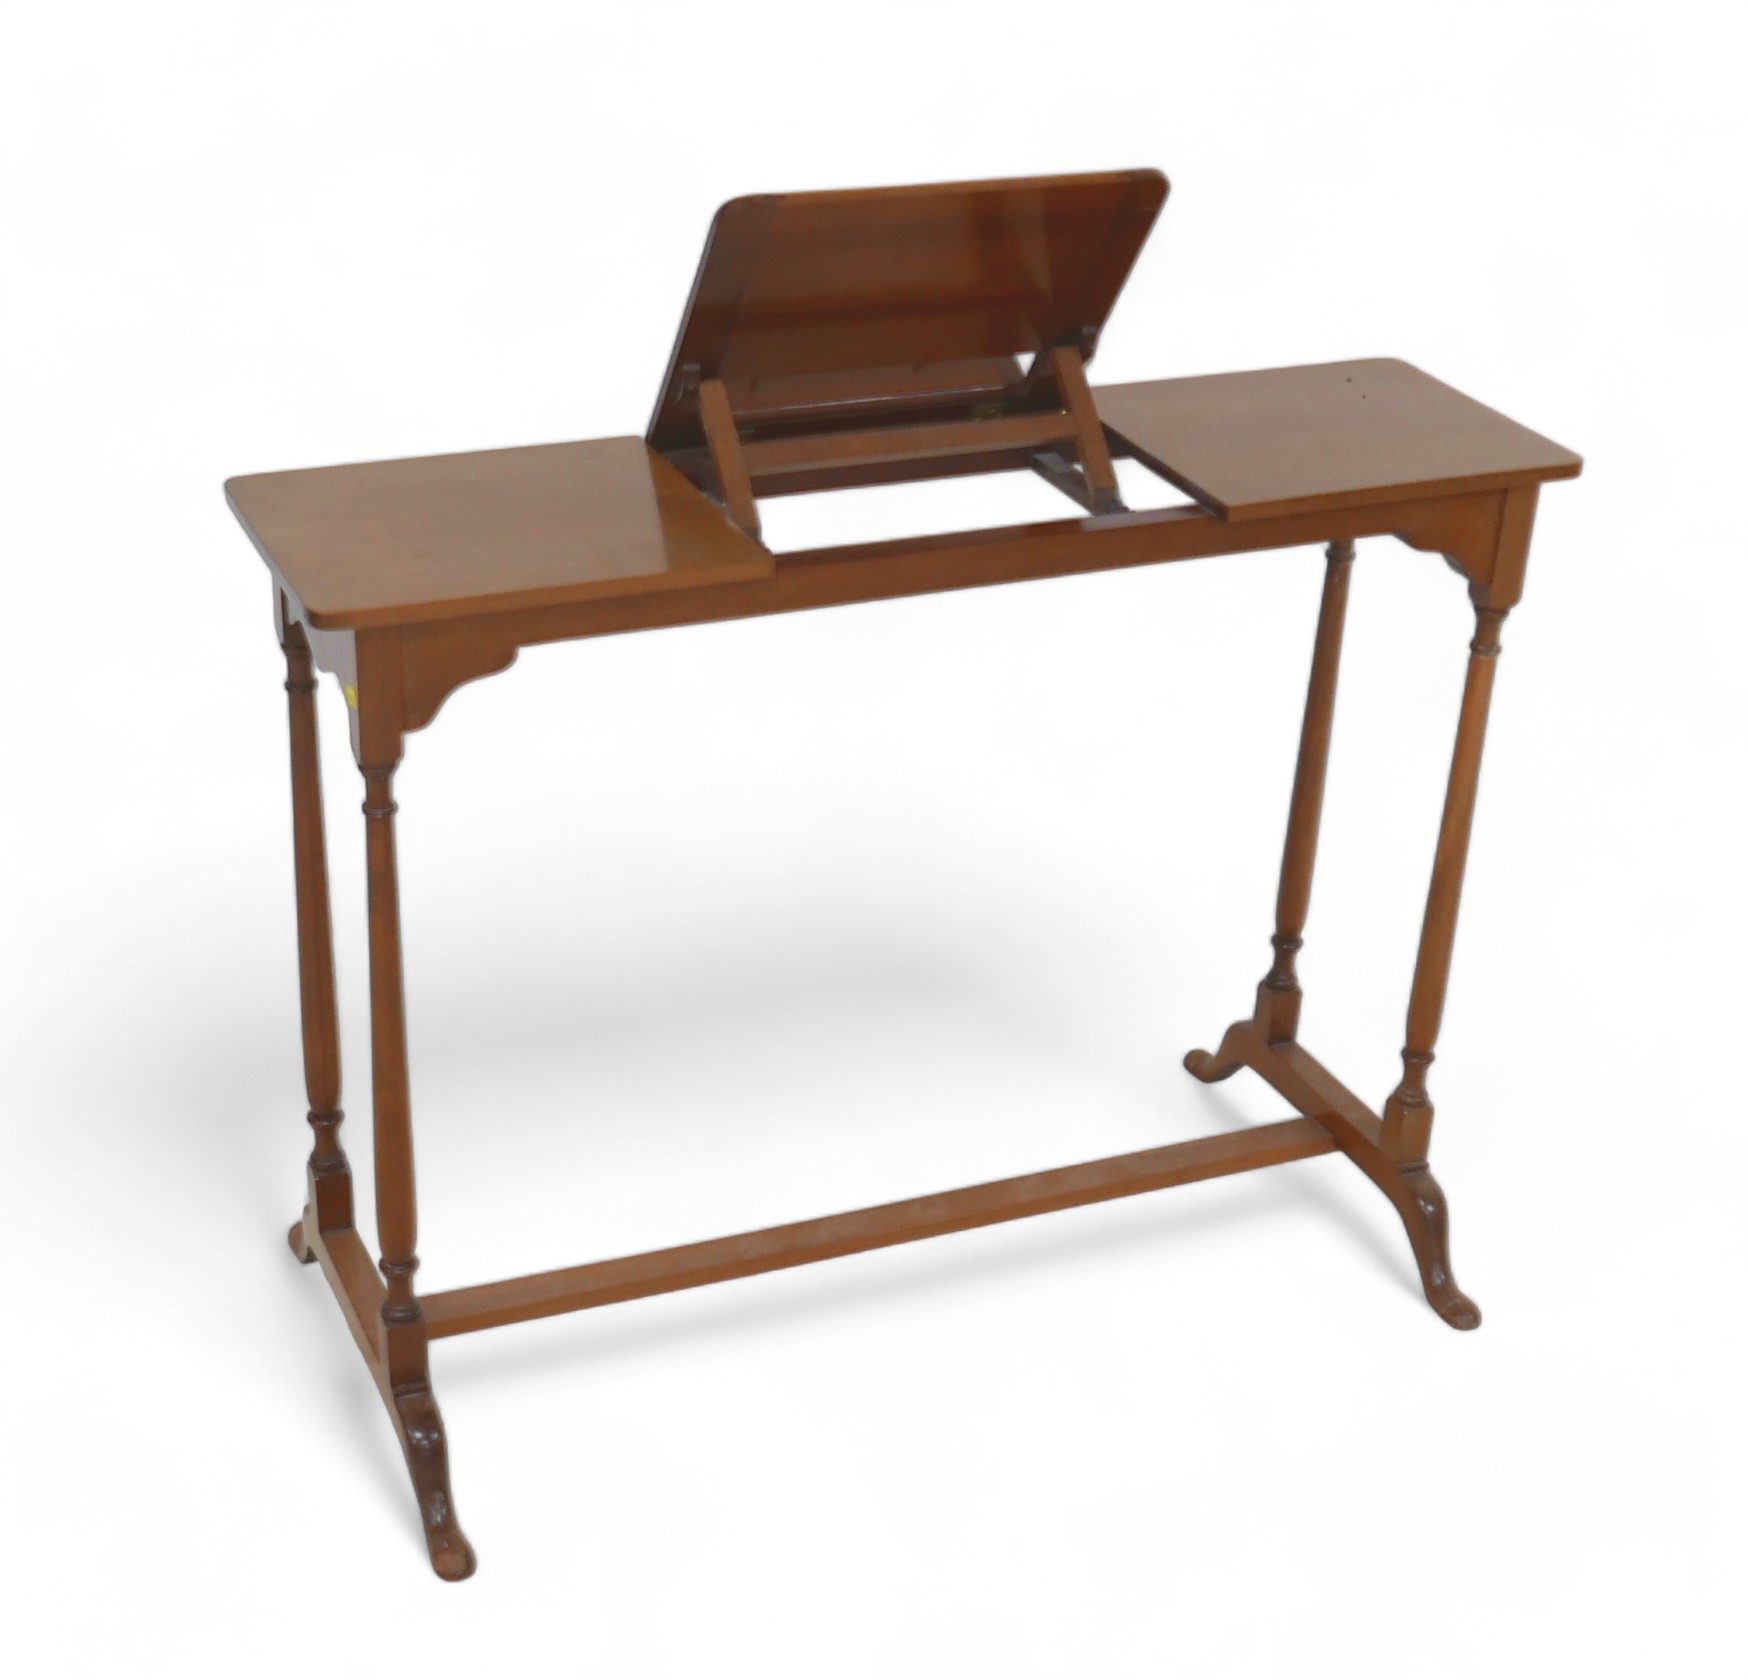 An early 1900s mahogany library reading table with a folding bookrest 93.5 by 46.5 by 68.5cm tall. - Image 11 of 11